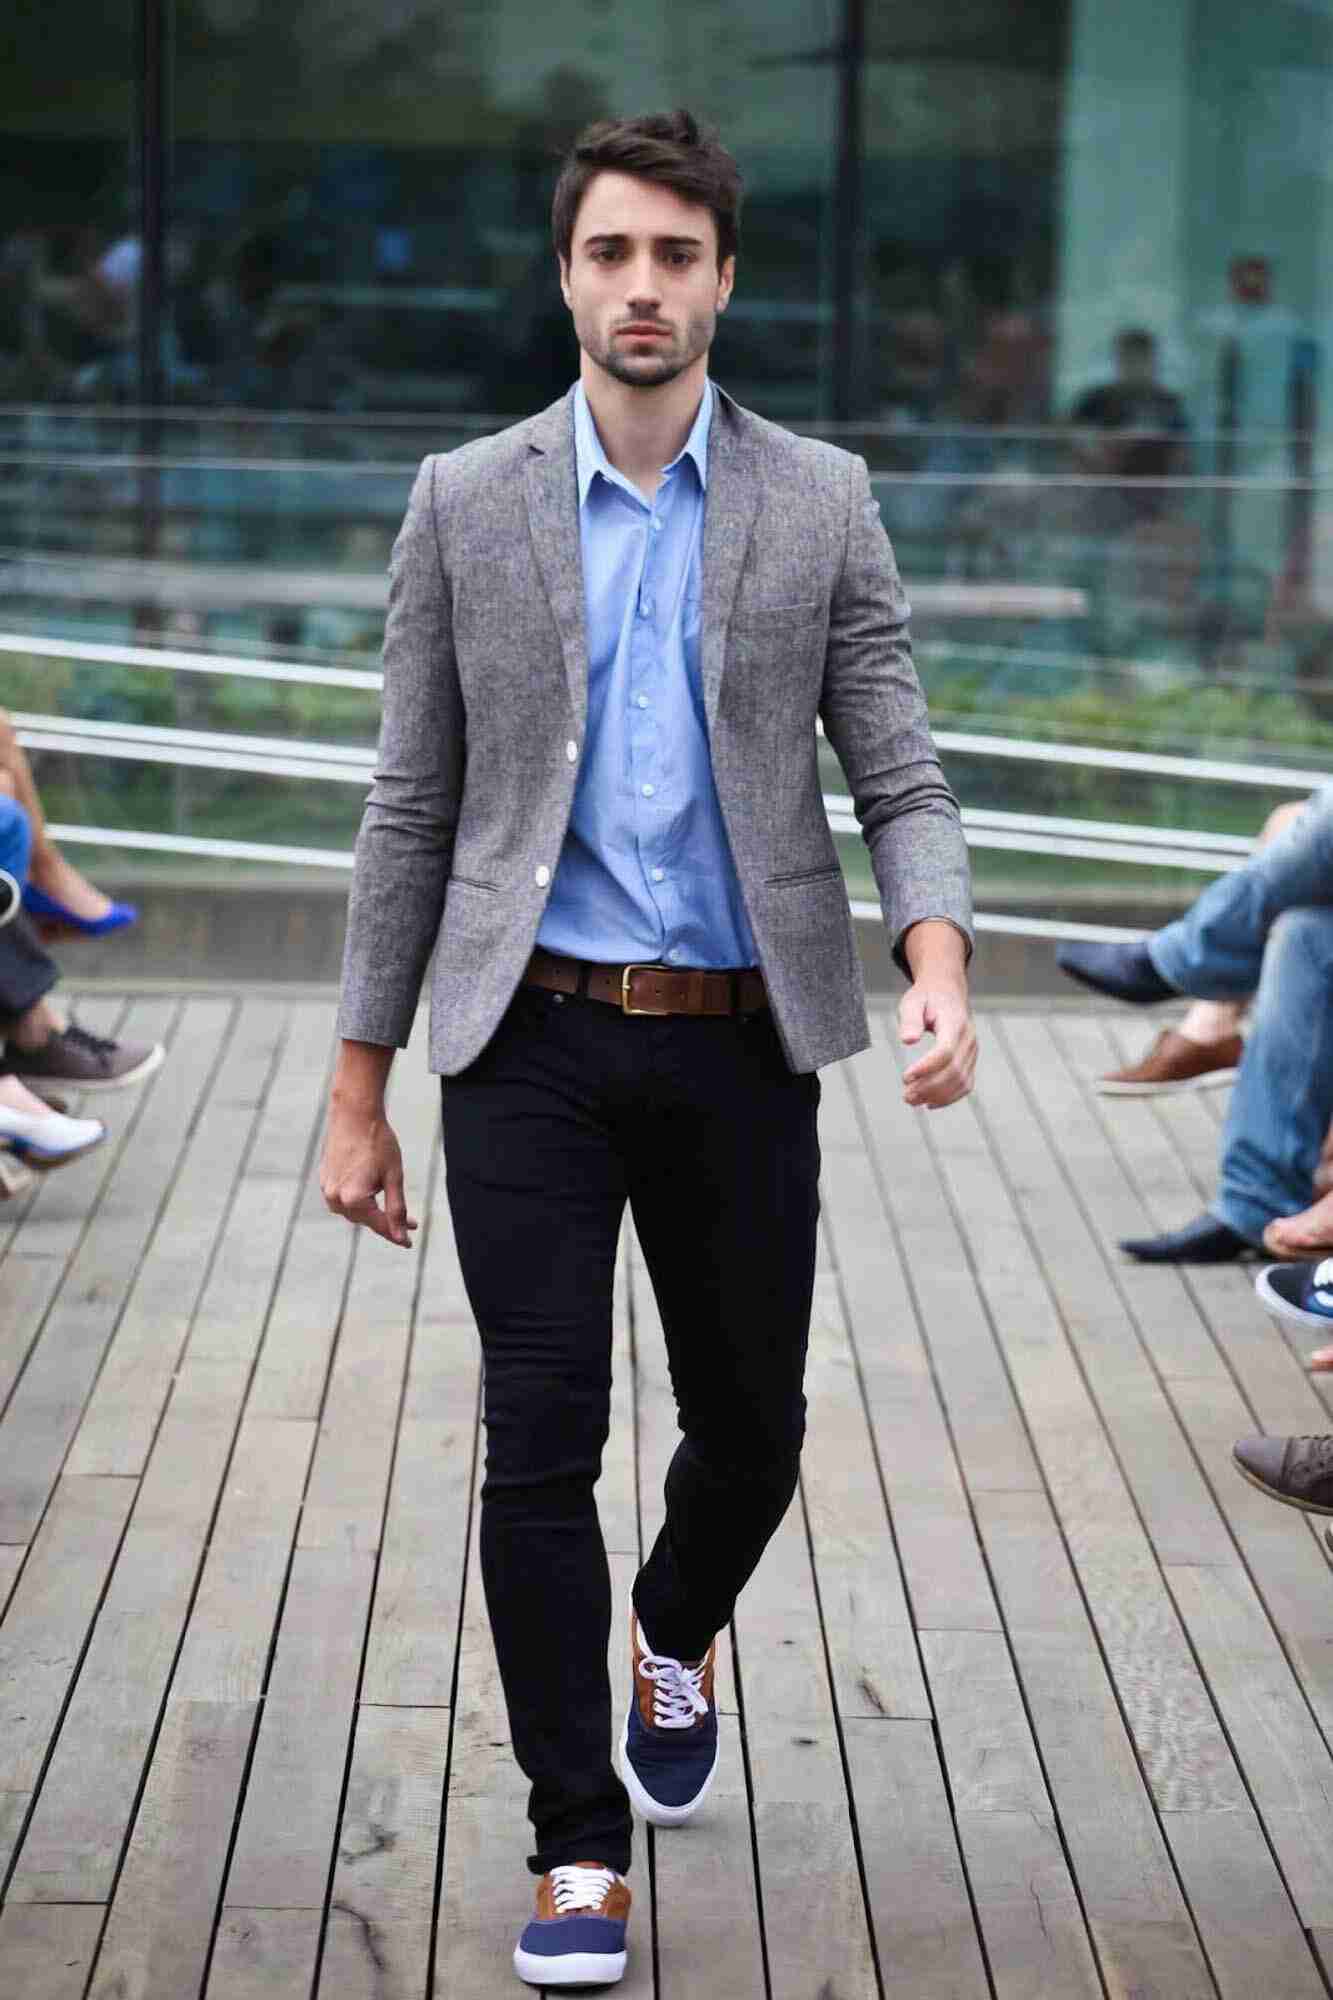 Men's fashion Chinos with sneakers and blazers wear summer outfit